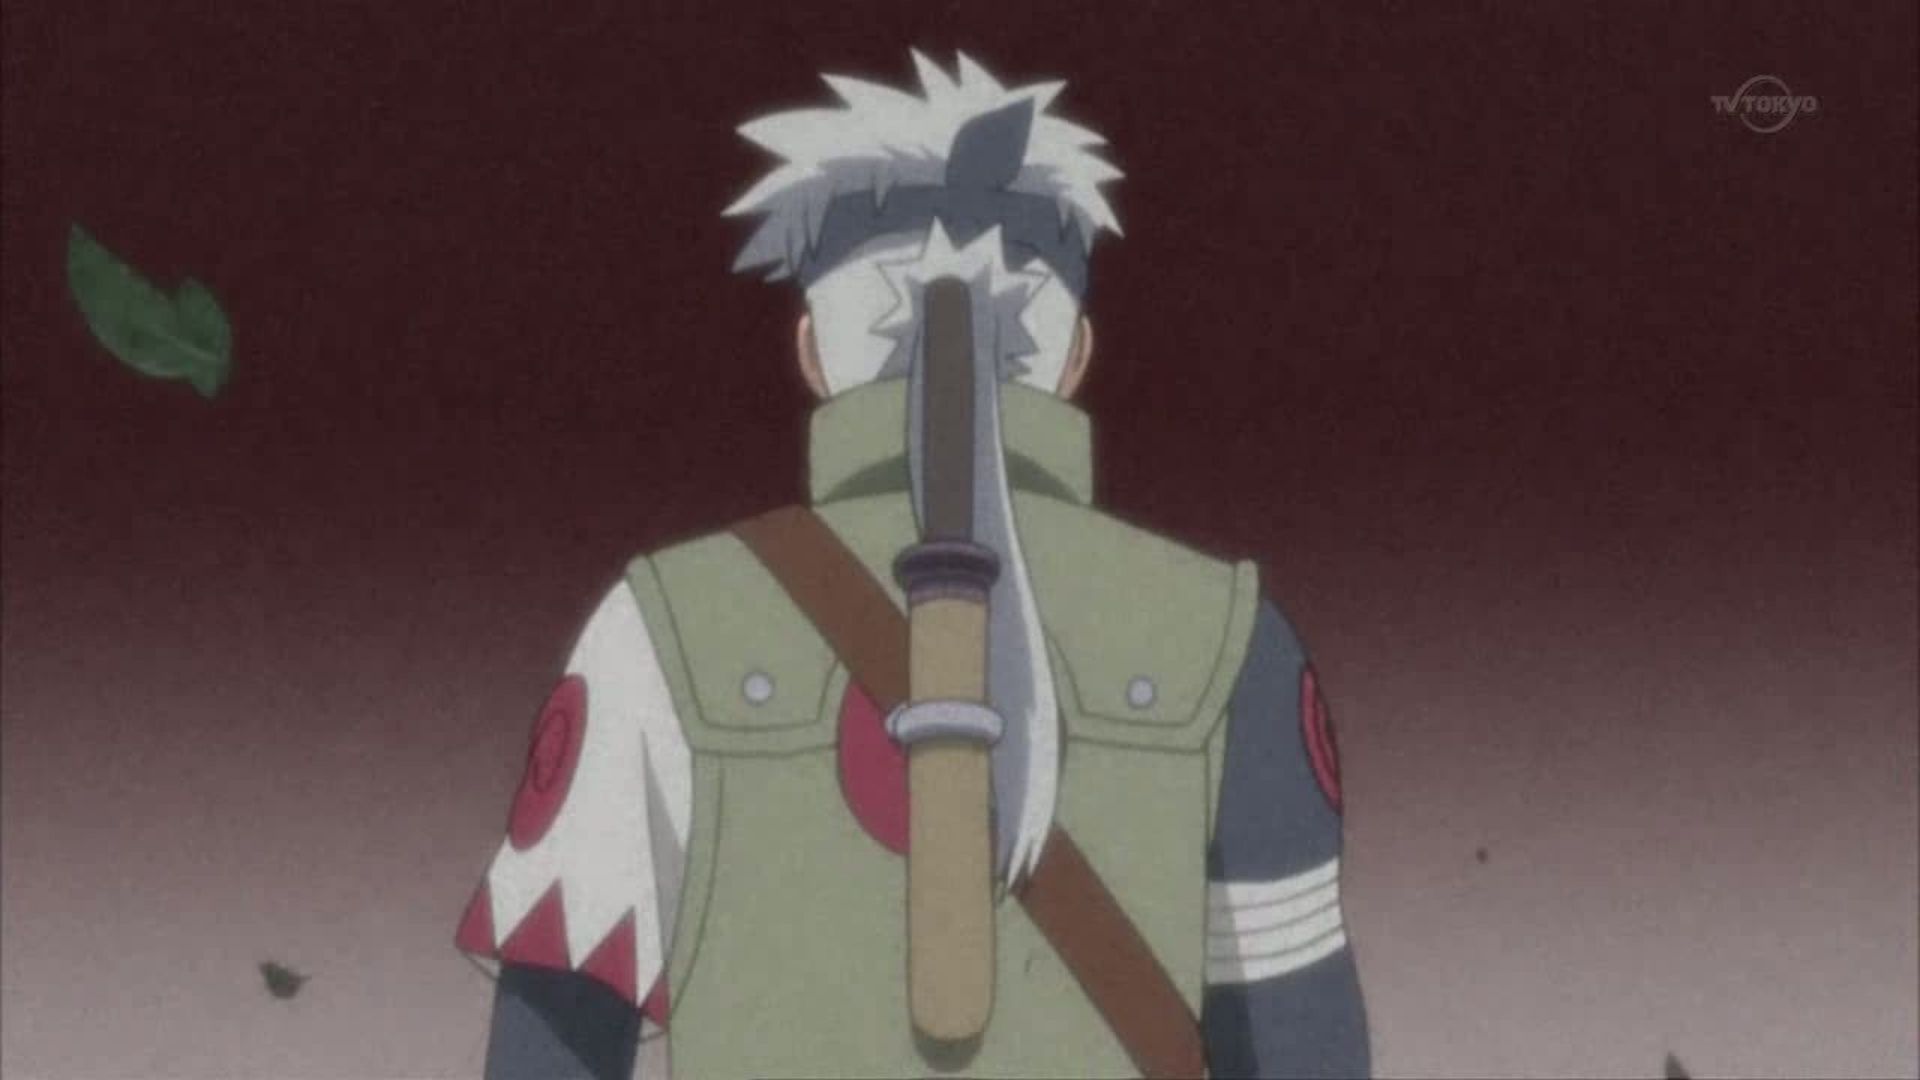 White Fang, one of the most brutal deaths in naruto